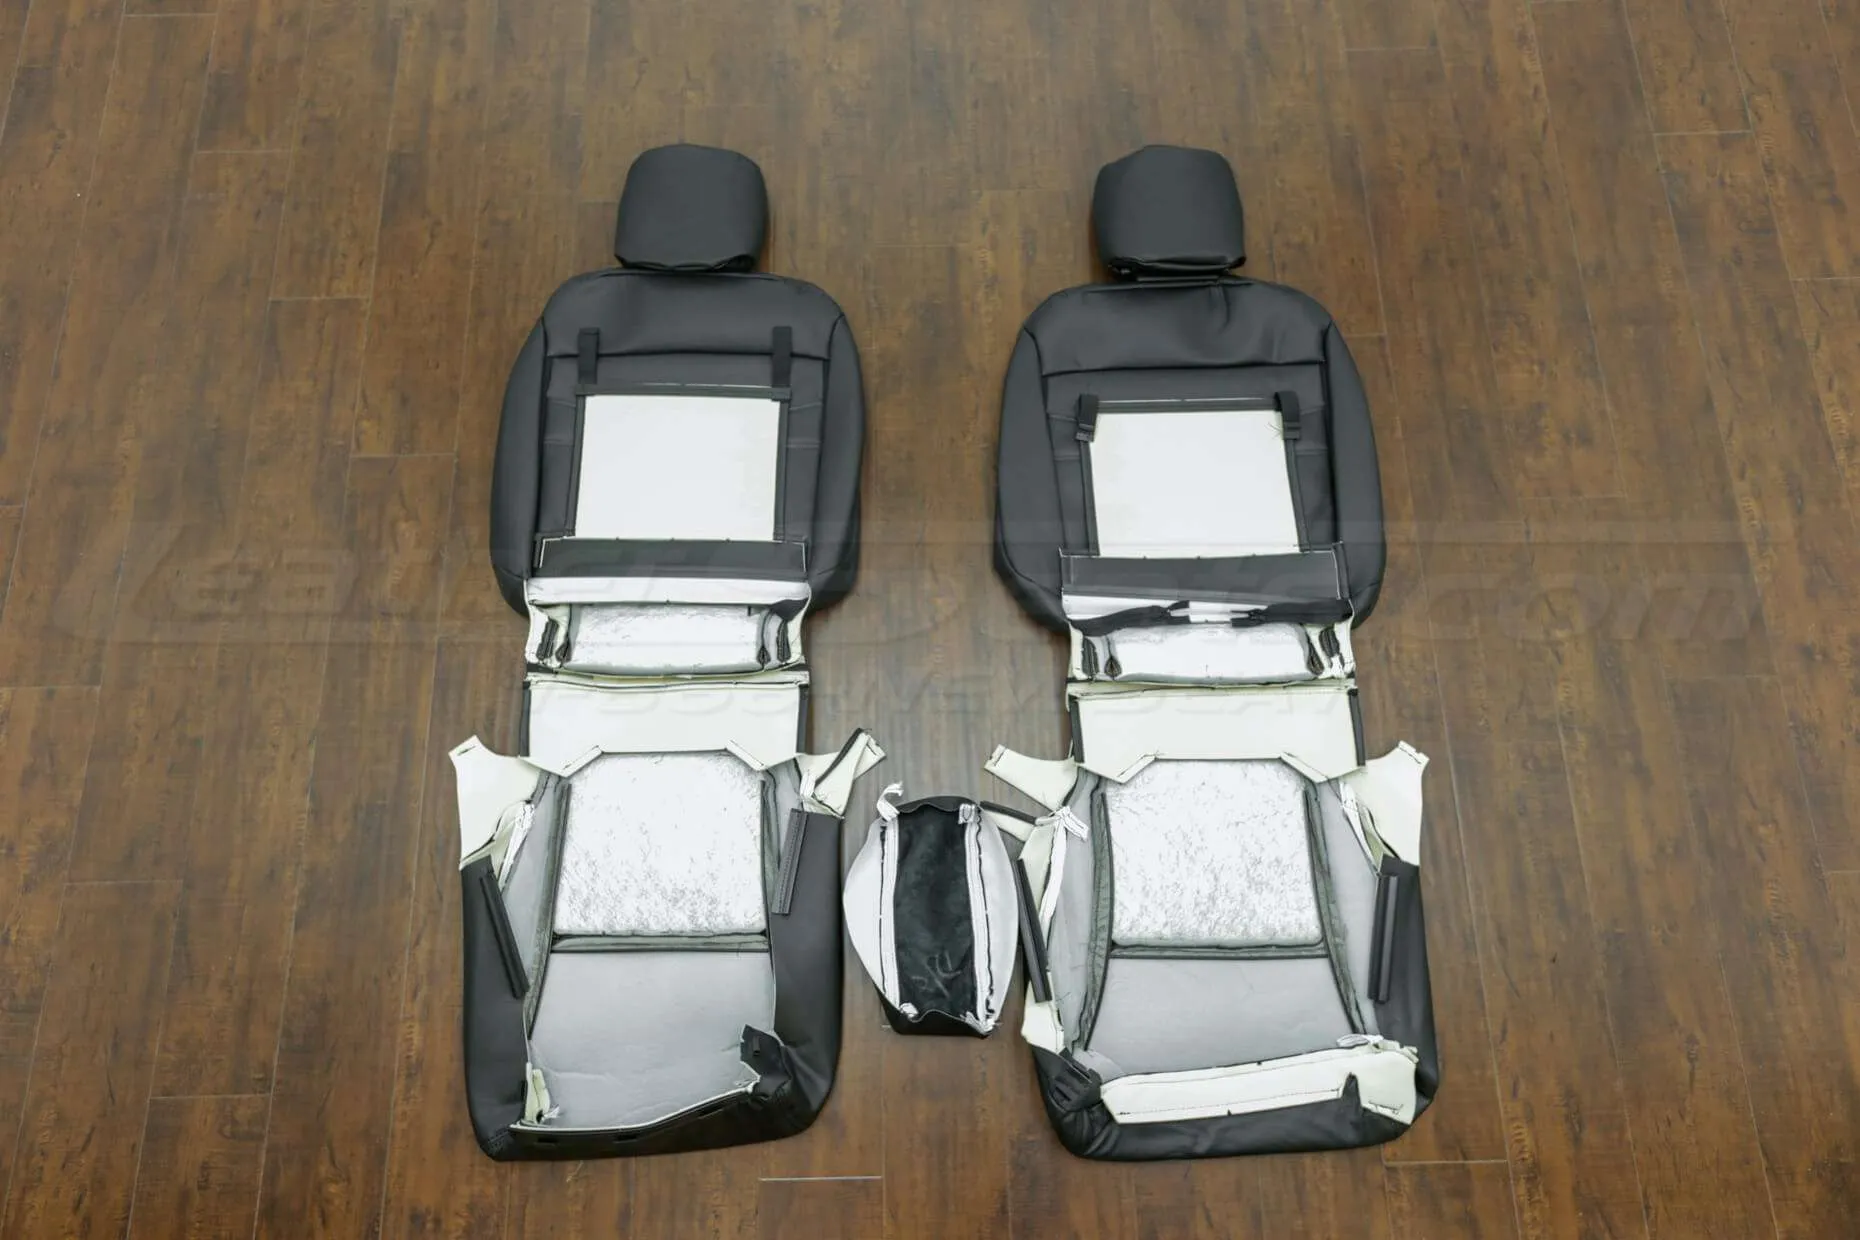 2014-2015 Honda Civic Upholstery Kit - Black - Back view of front seats and console lid cover,